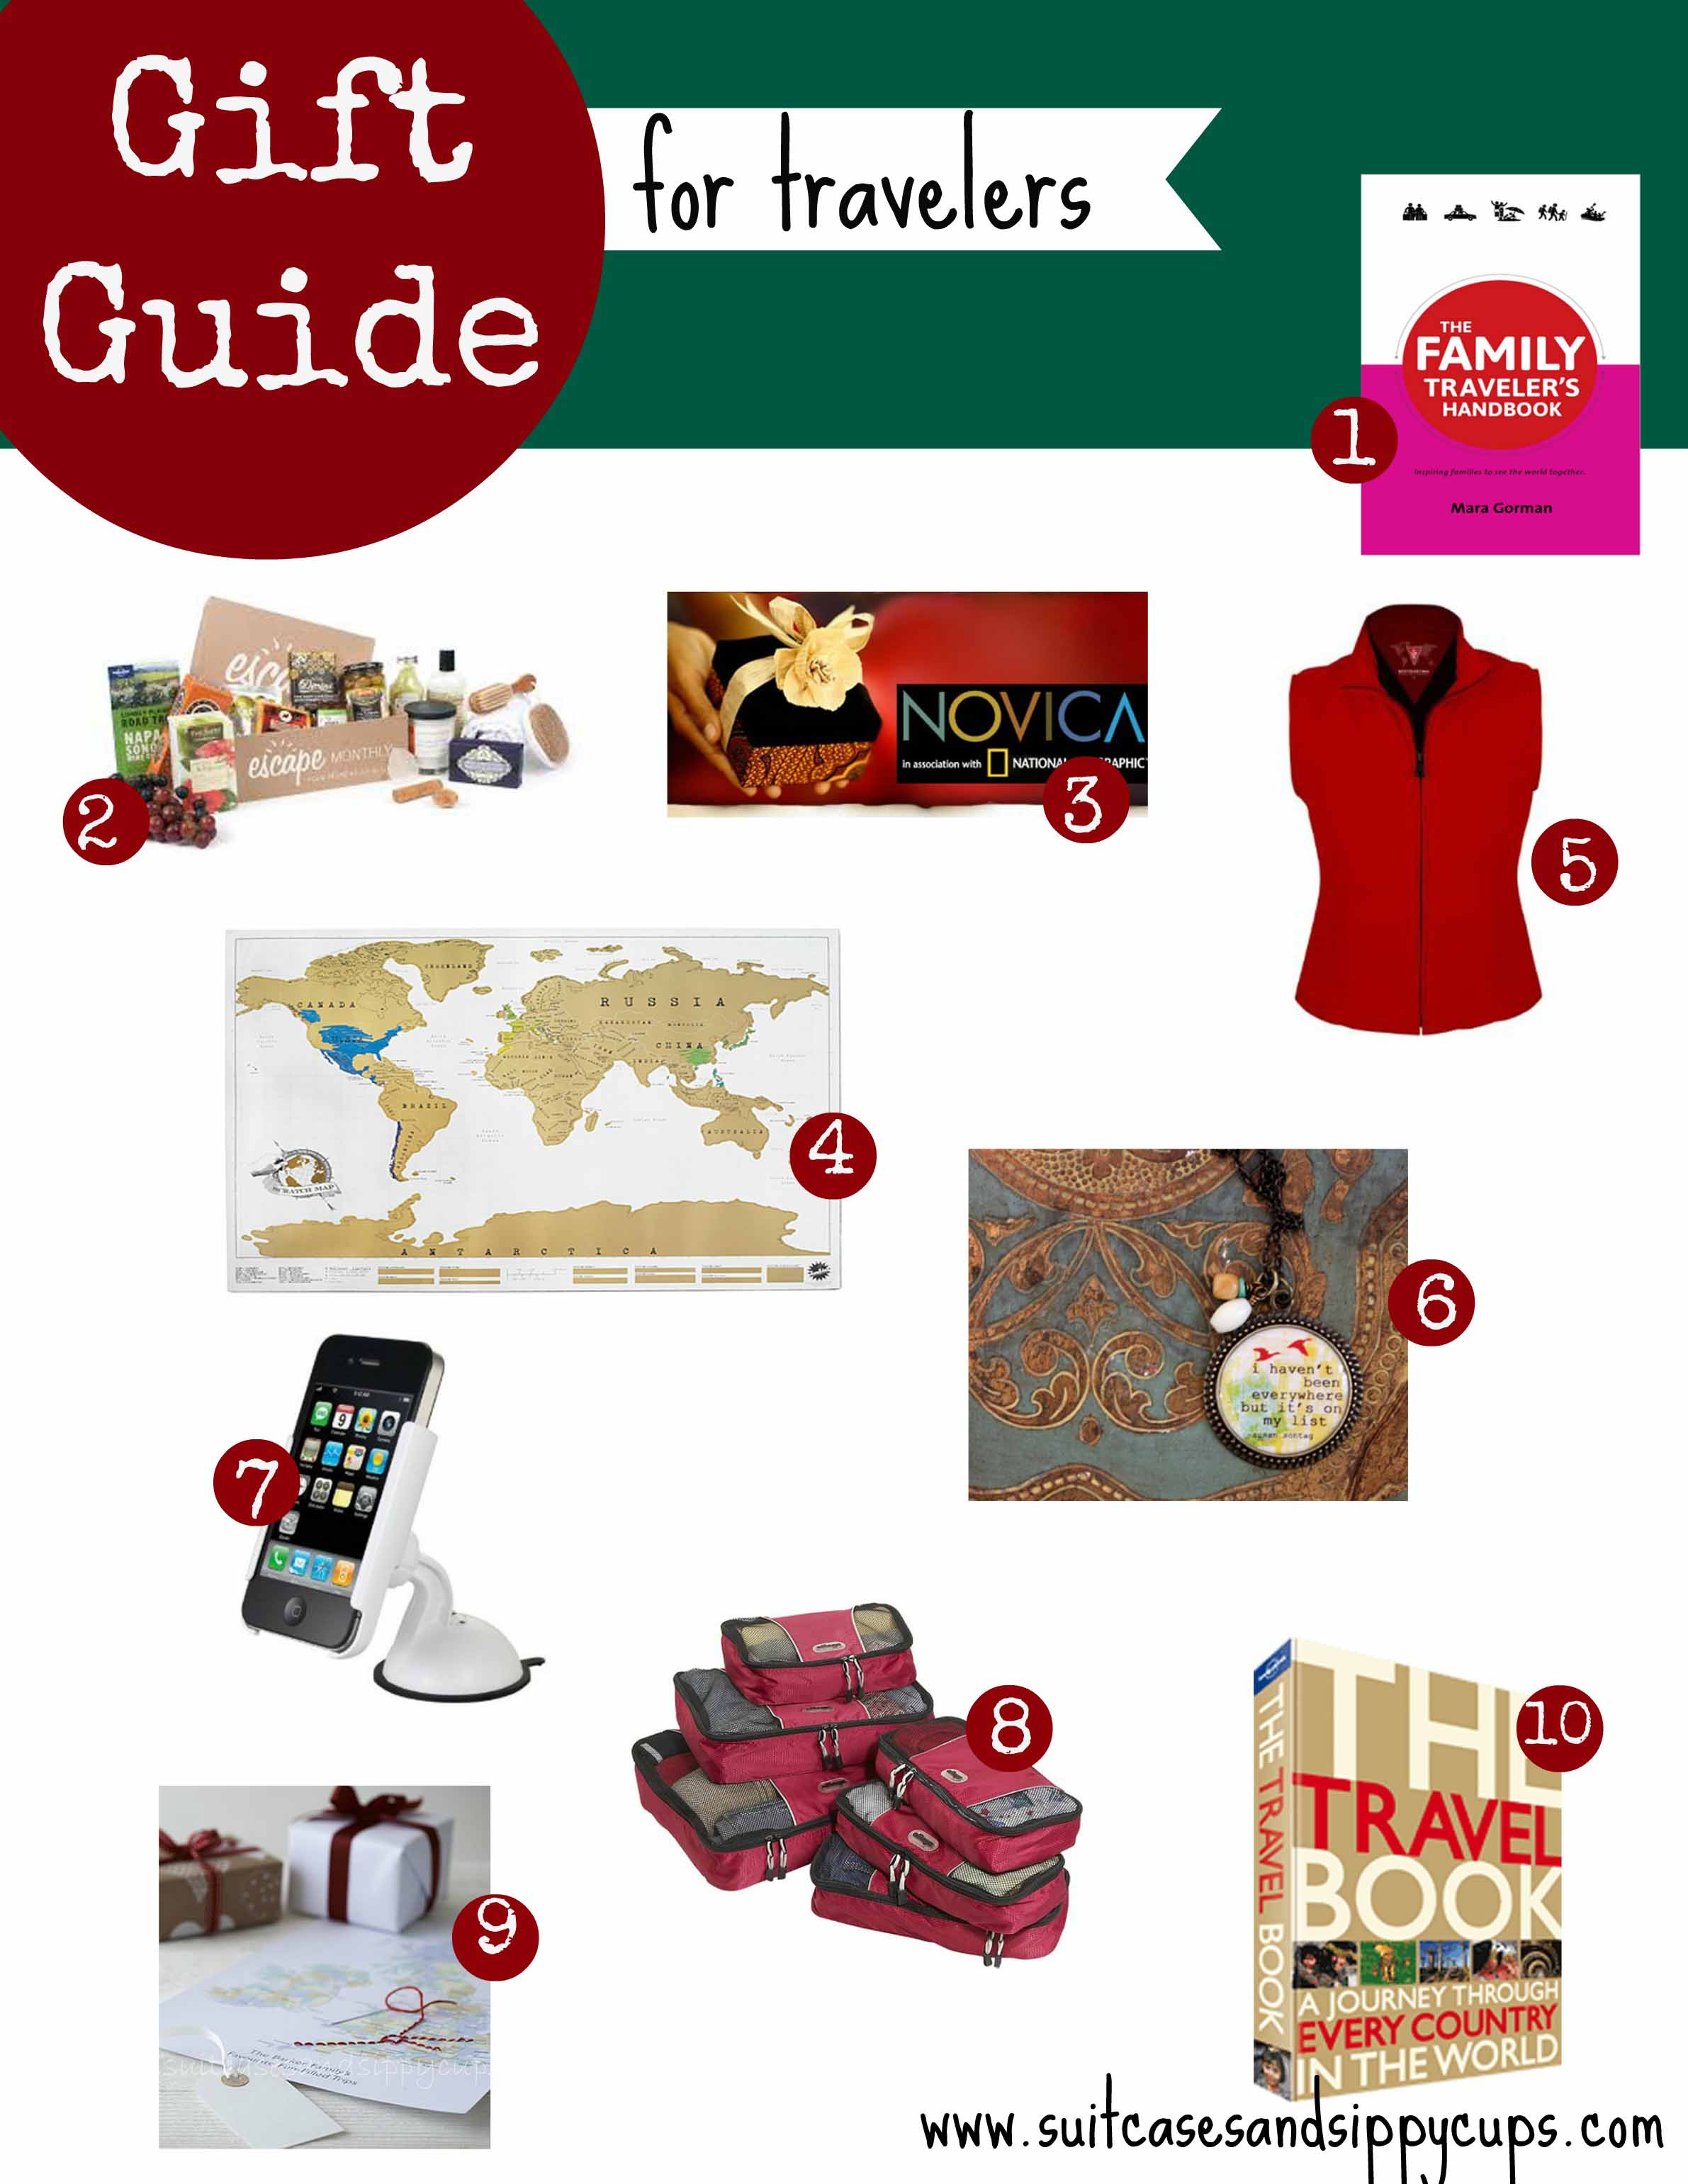 Holiday Gift Guide for Travelers